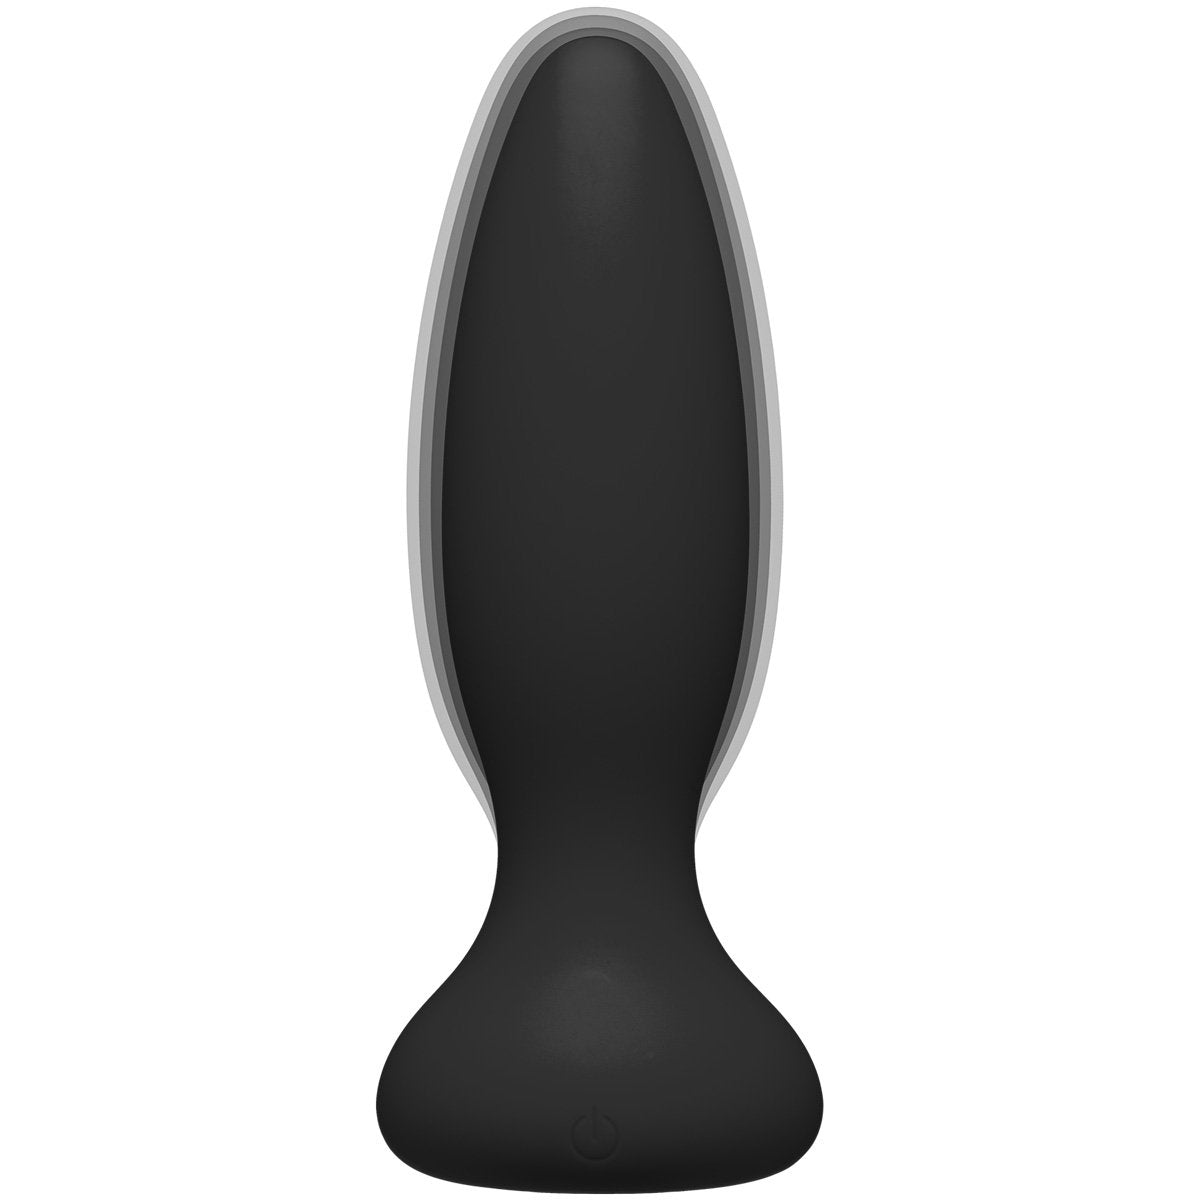 Doc Johnson A Play Experienced VIBE – Silicone Vibrating Butt Plug with Remote – Black